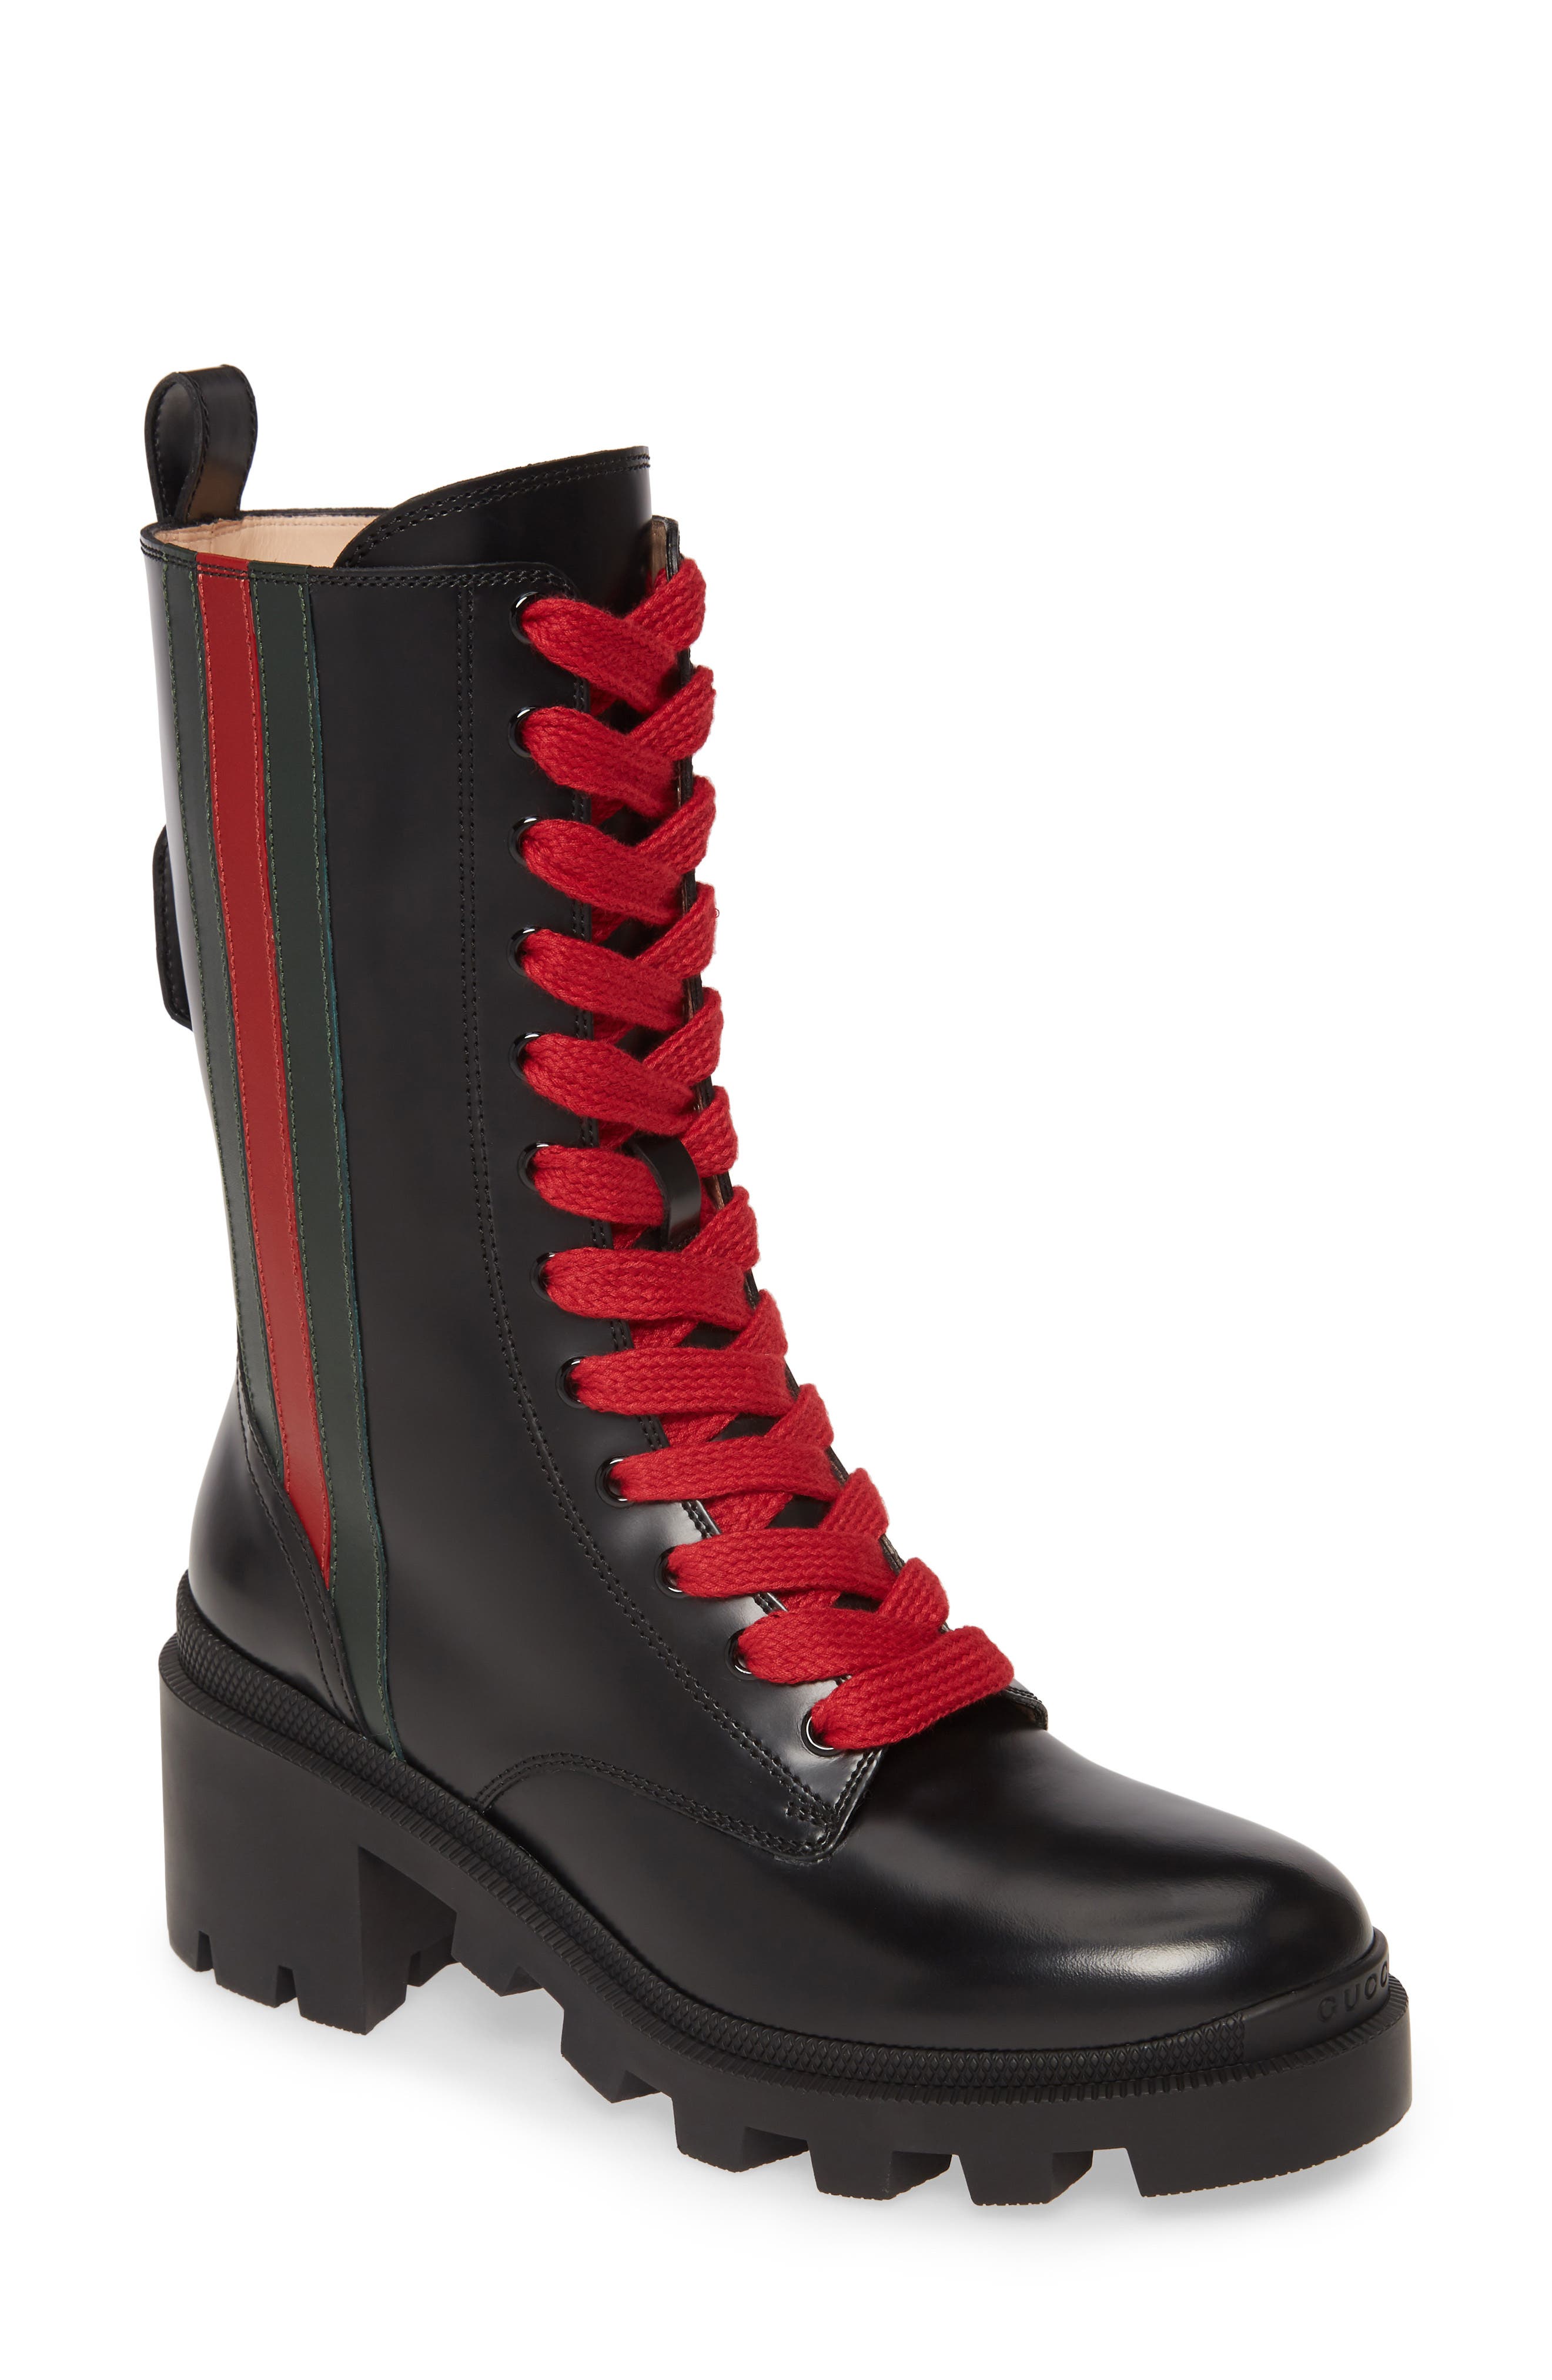 gucci black boots red laces, OFF 78 